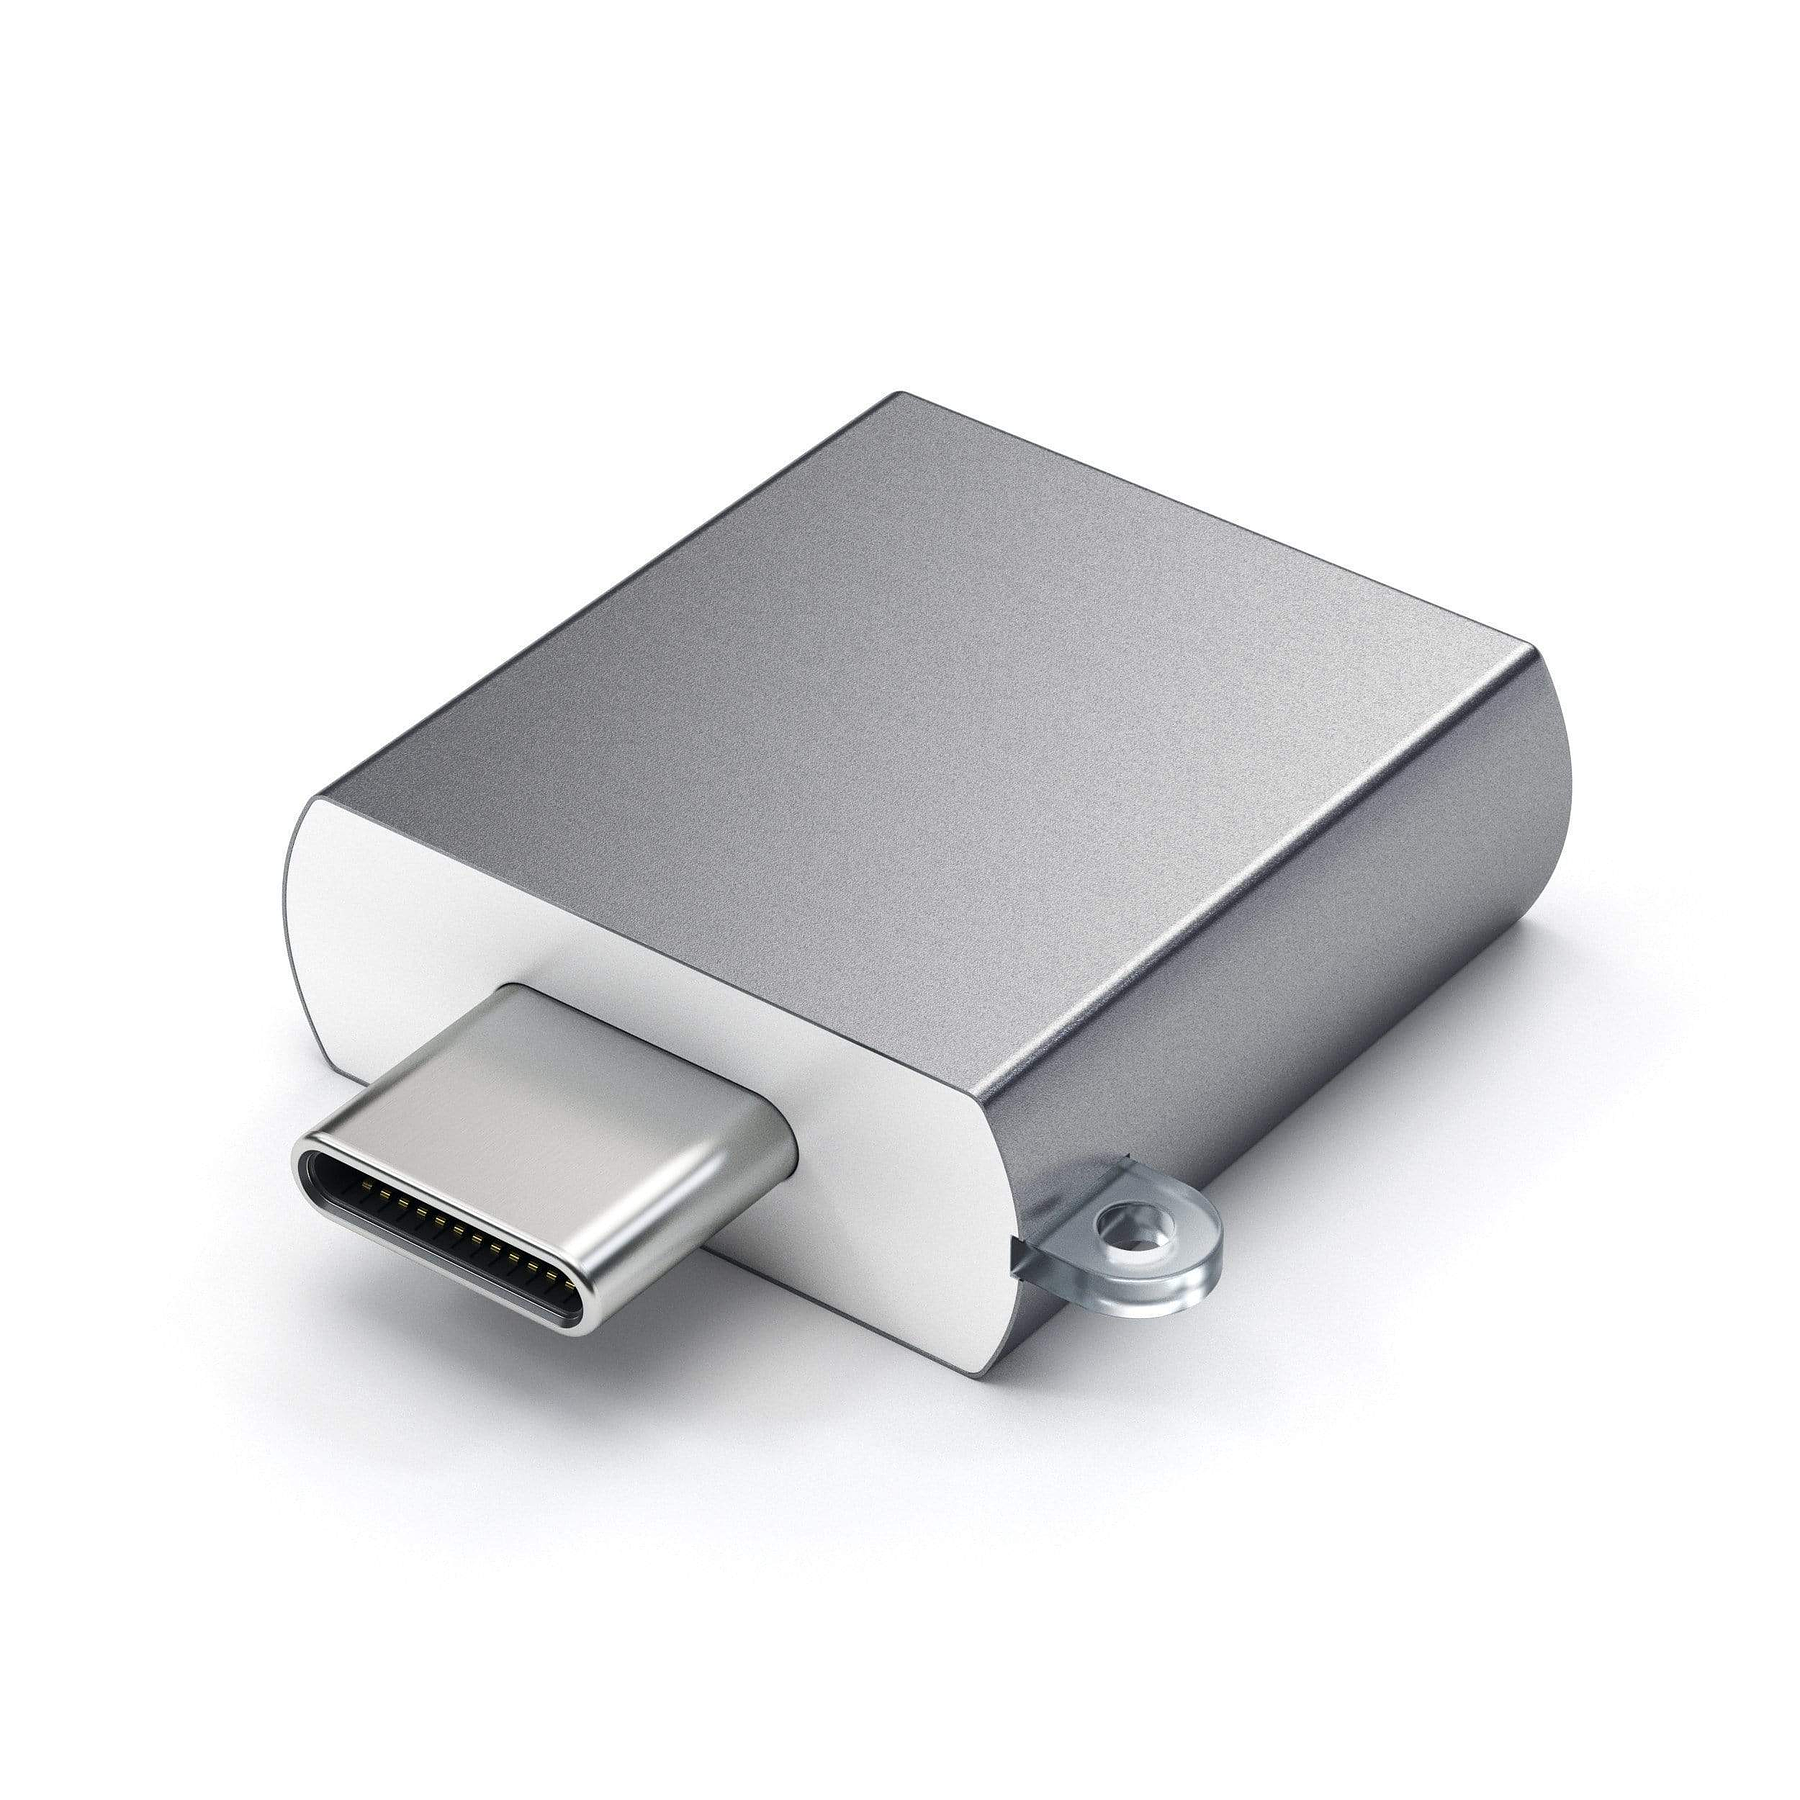 Satechi - USB-C to USB3 Adapter (space grey)